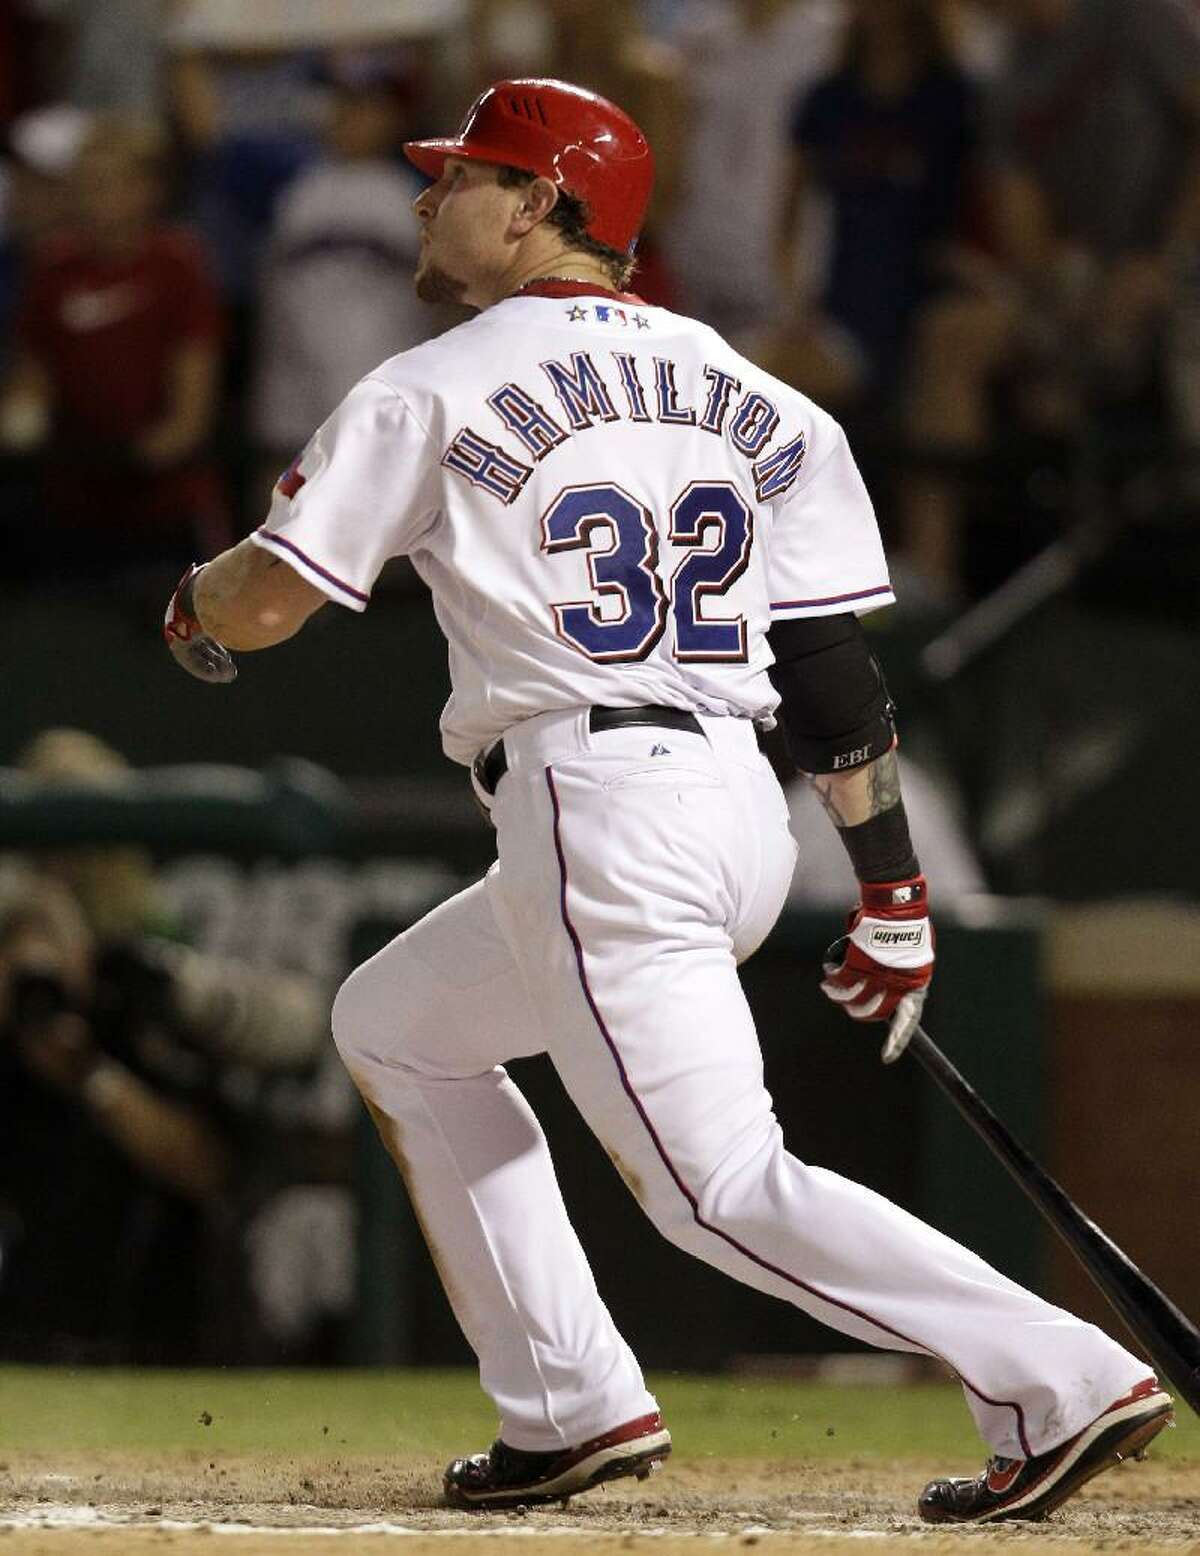 Back with Texas, a last chance in MLB for Josh Hamilton?